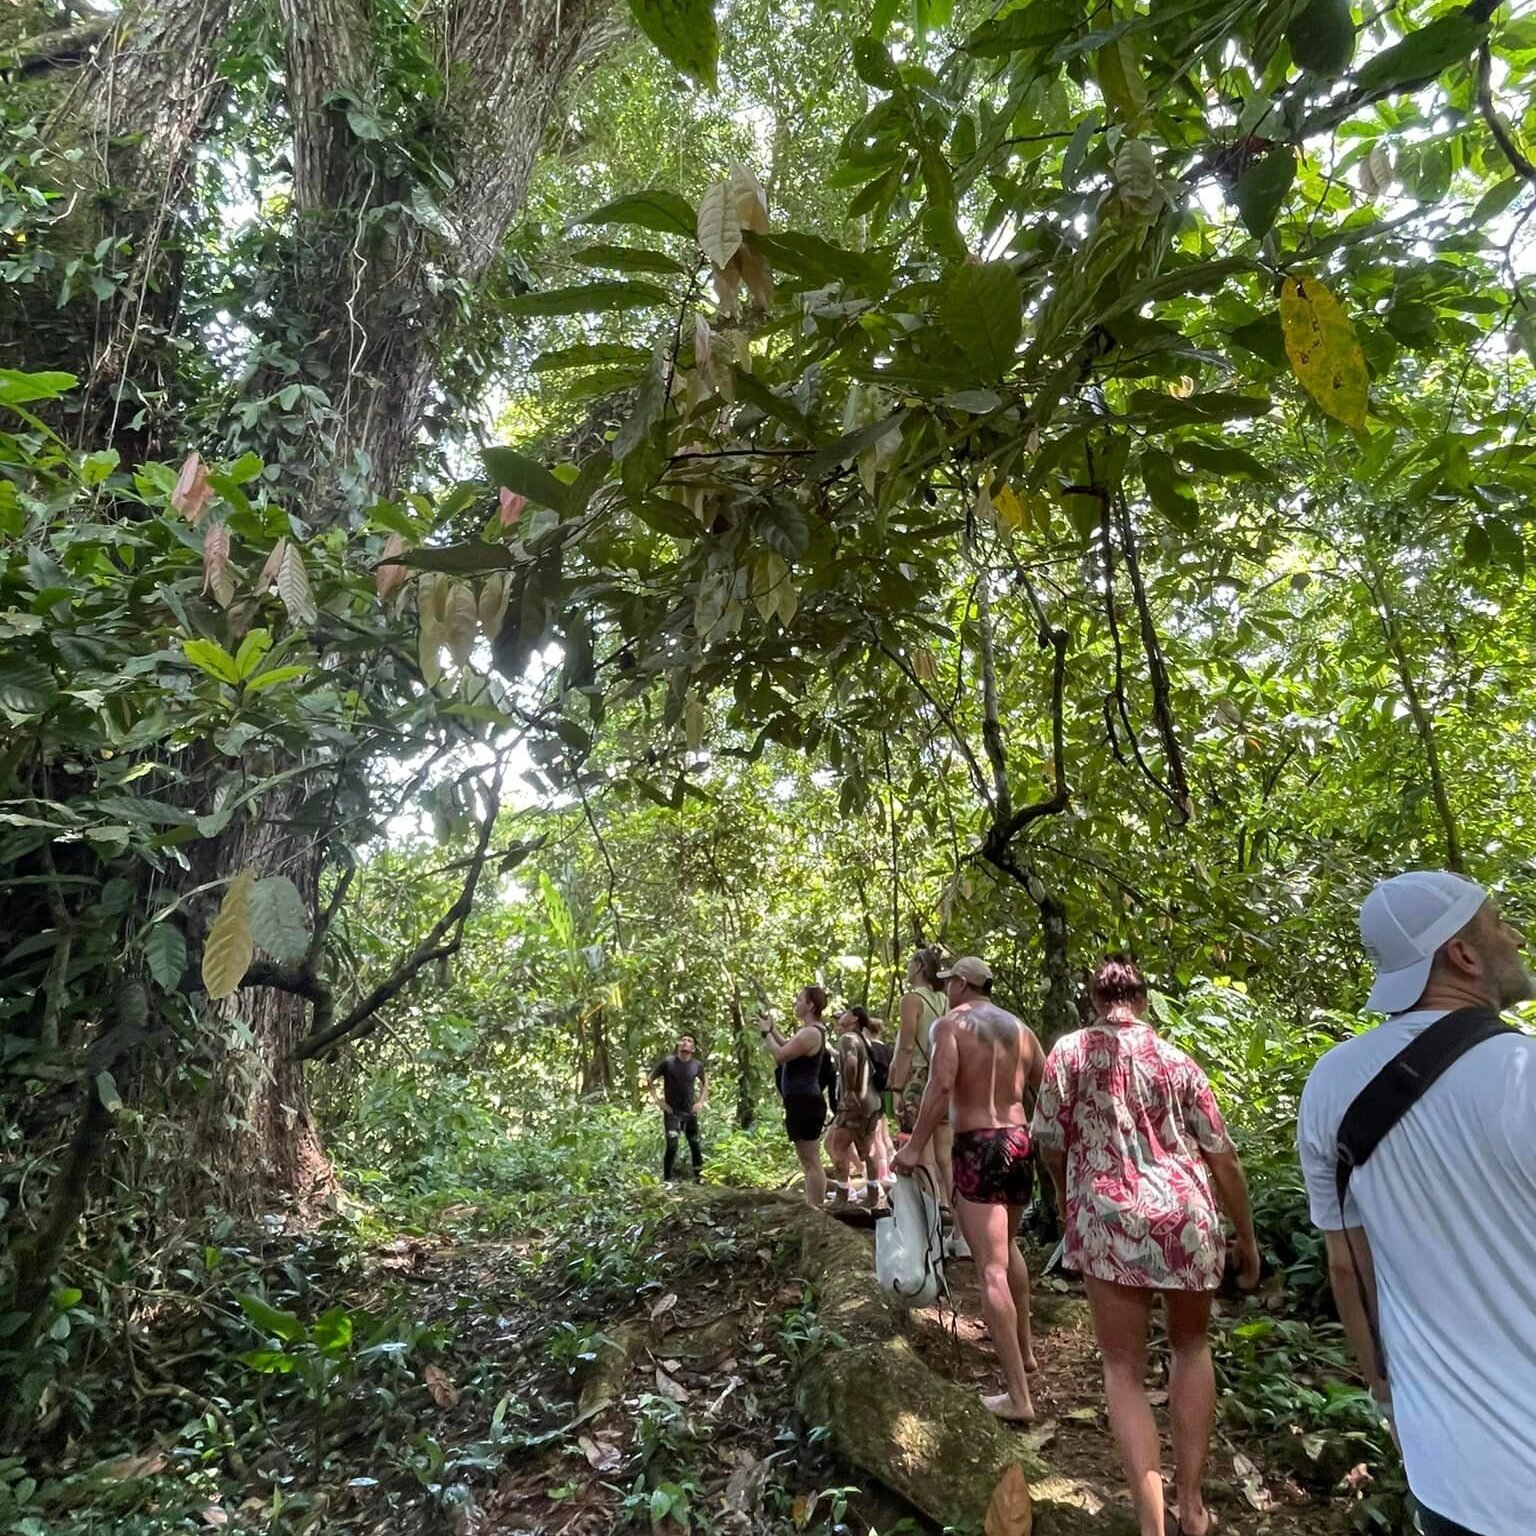 This month, Planet Rehab is thrilled to have hosted a short Expedition in Bocas del Toro, Panama.  A group of 12 US veterans from LiboRisk joined us for an inspiring 2 day stay including tours of Green Acres Chocolate Farm, planting Almendro trees, a